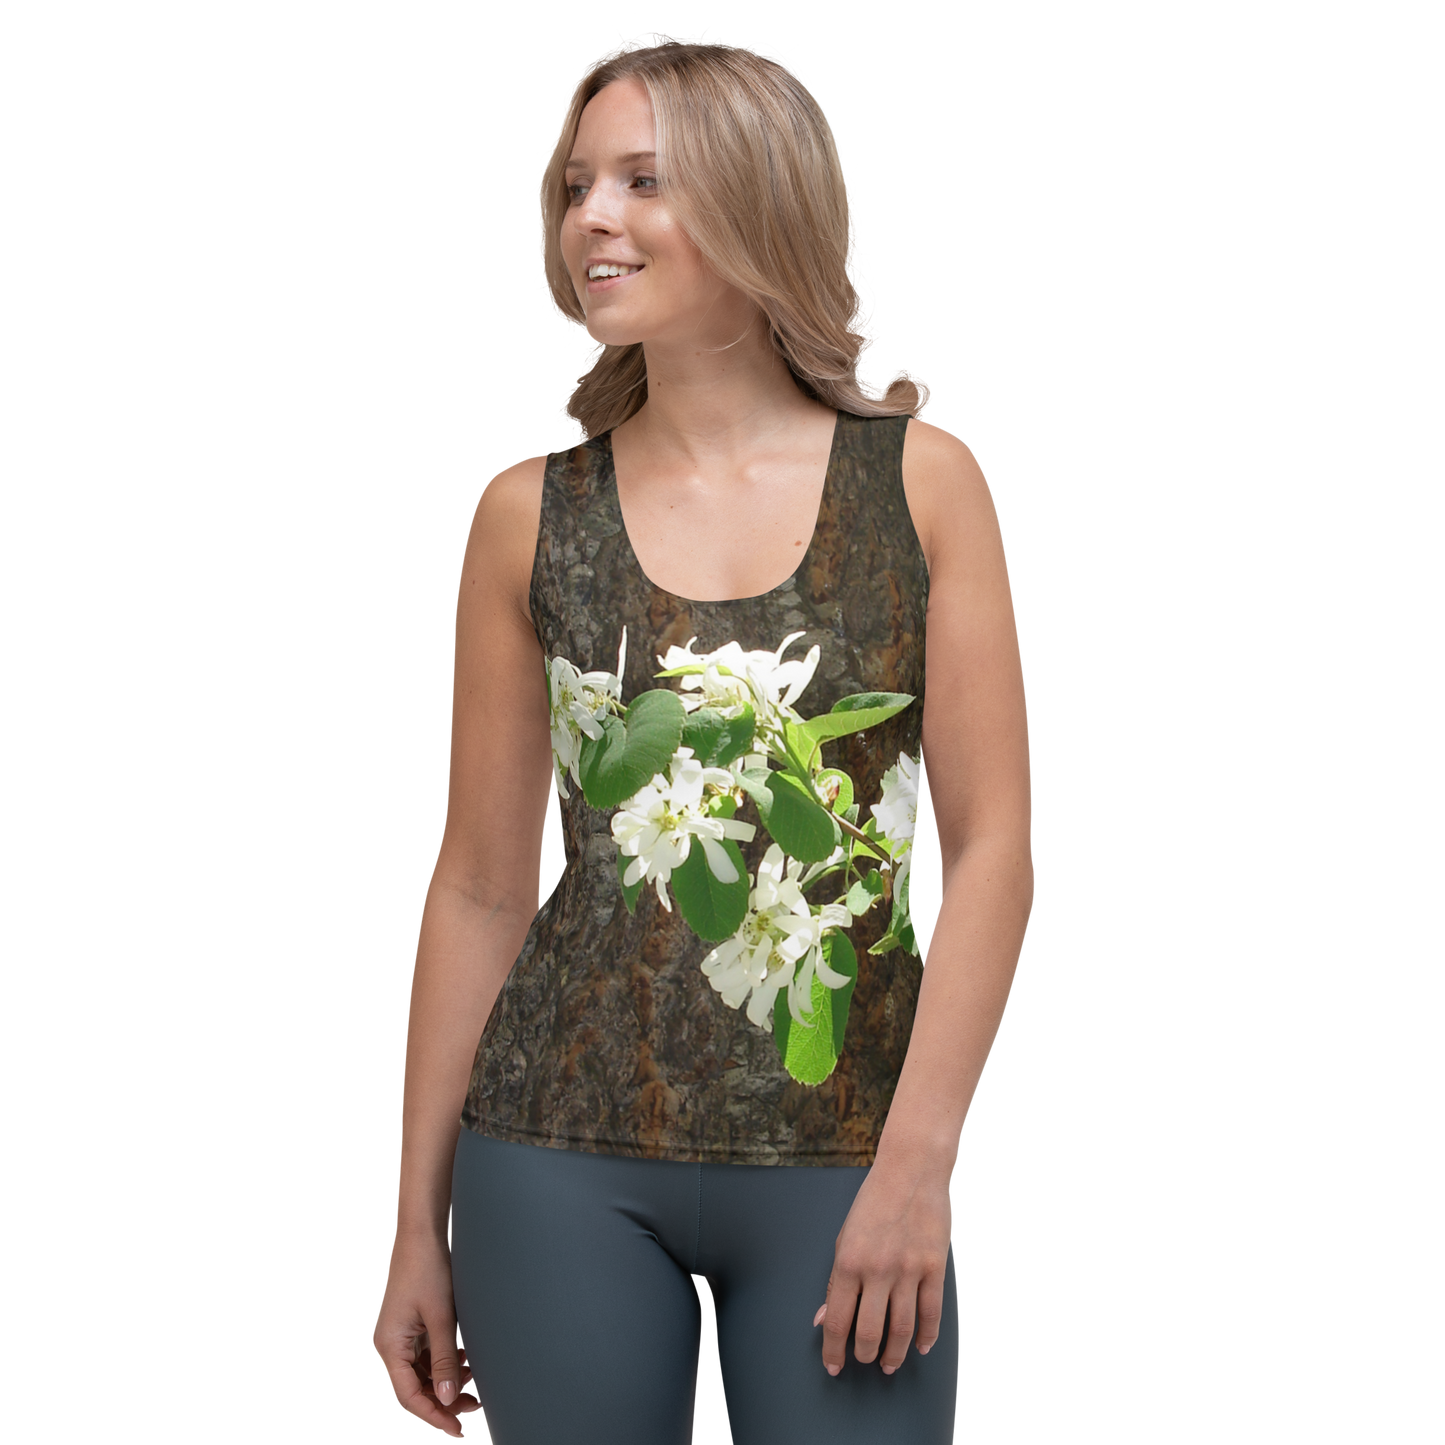 The EARTH LOVE Collection - "Bark & Blossom Bliss" Design Tank Top